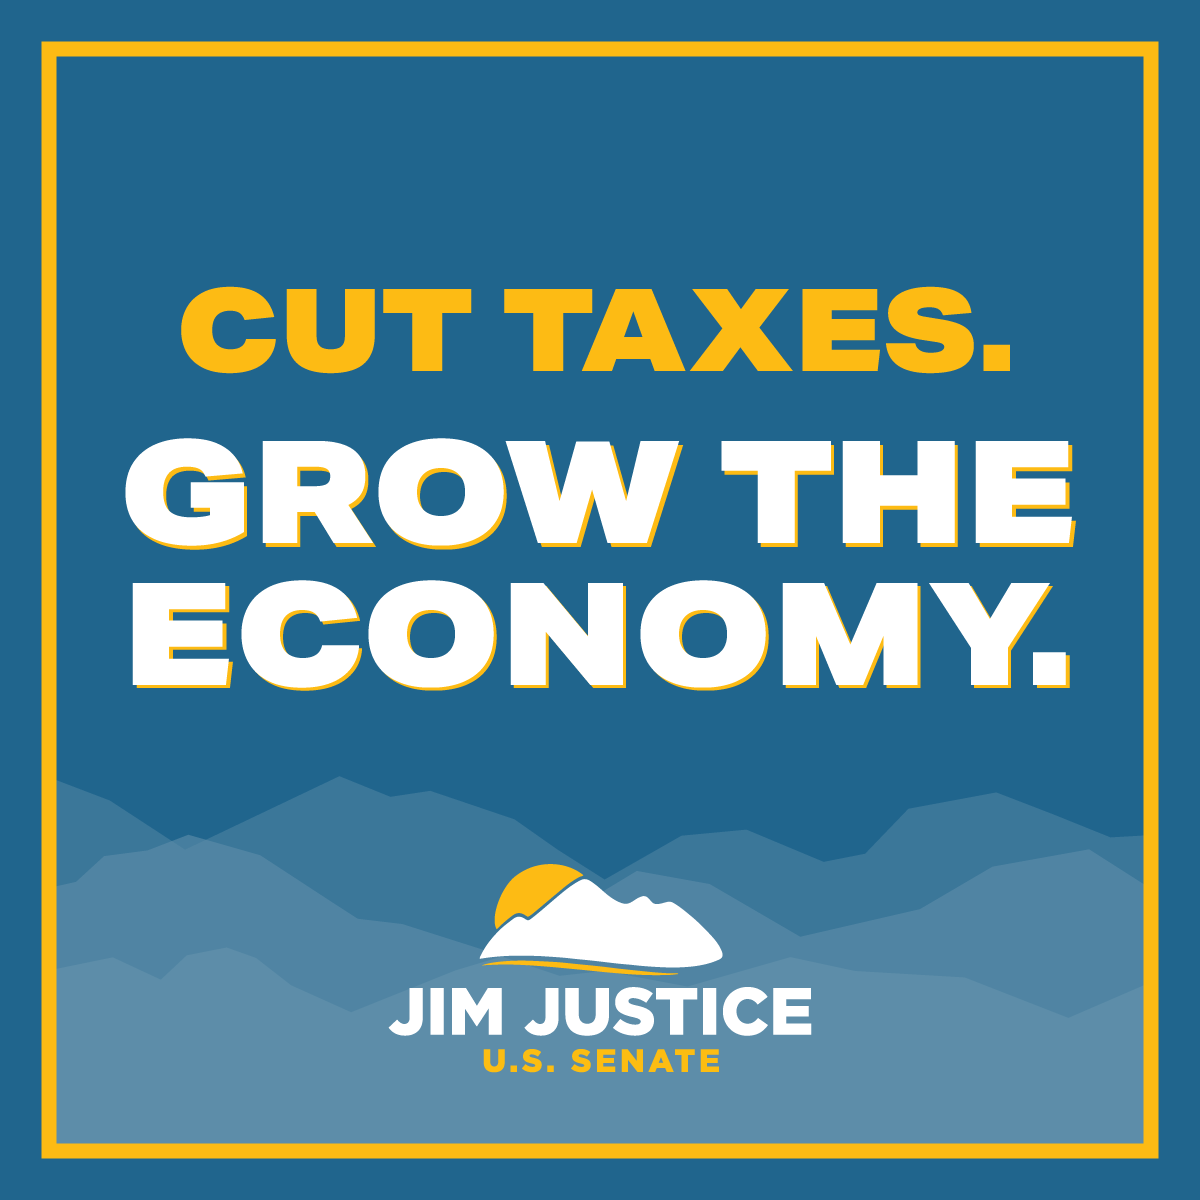 In West Virginia, we have grown our economy by cutting taxes, creating historic prosperity in our state. In Washington, I will work to cut taxes and allow Americans to keep more of their hard-earned money.